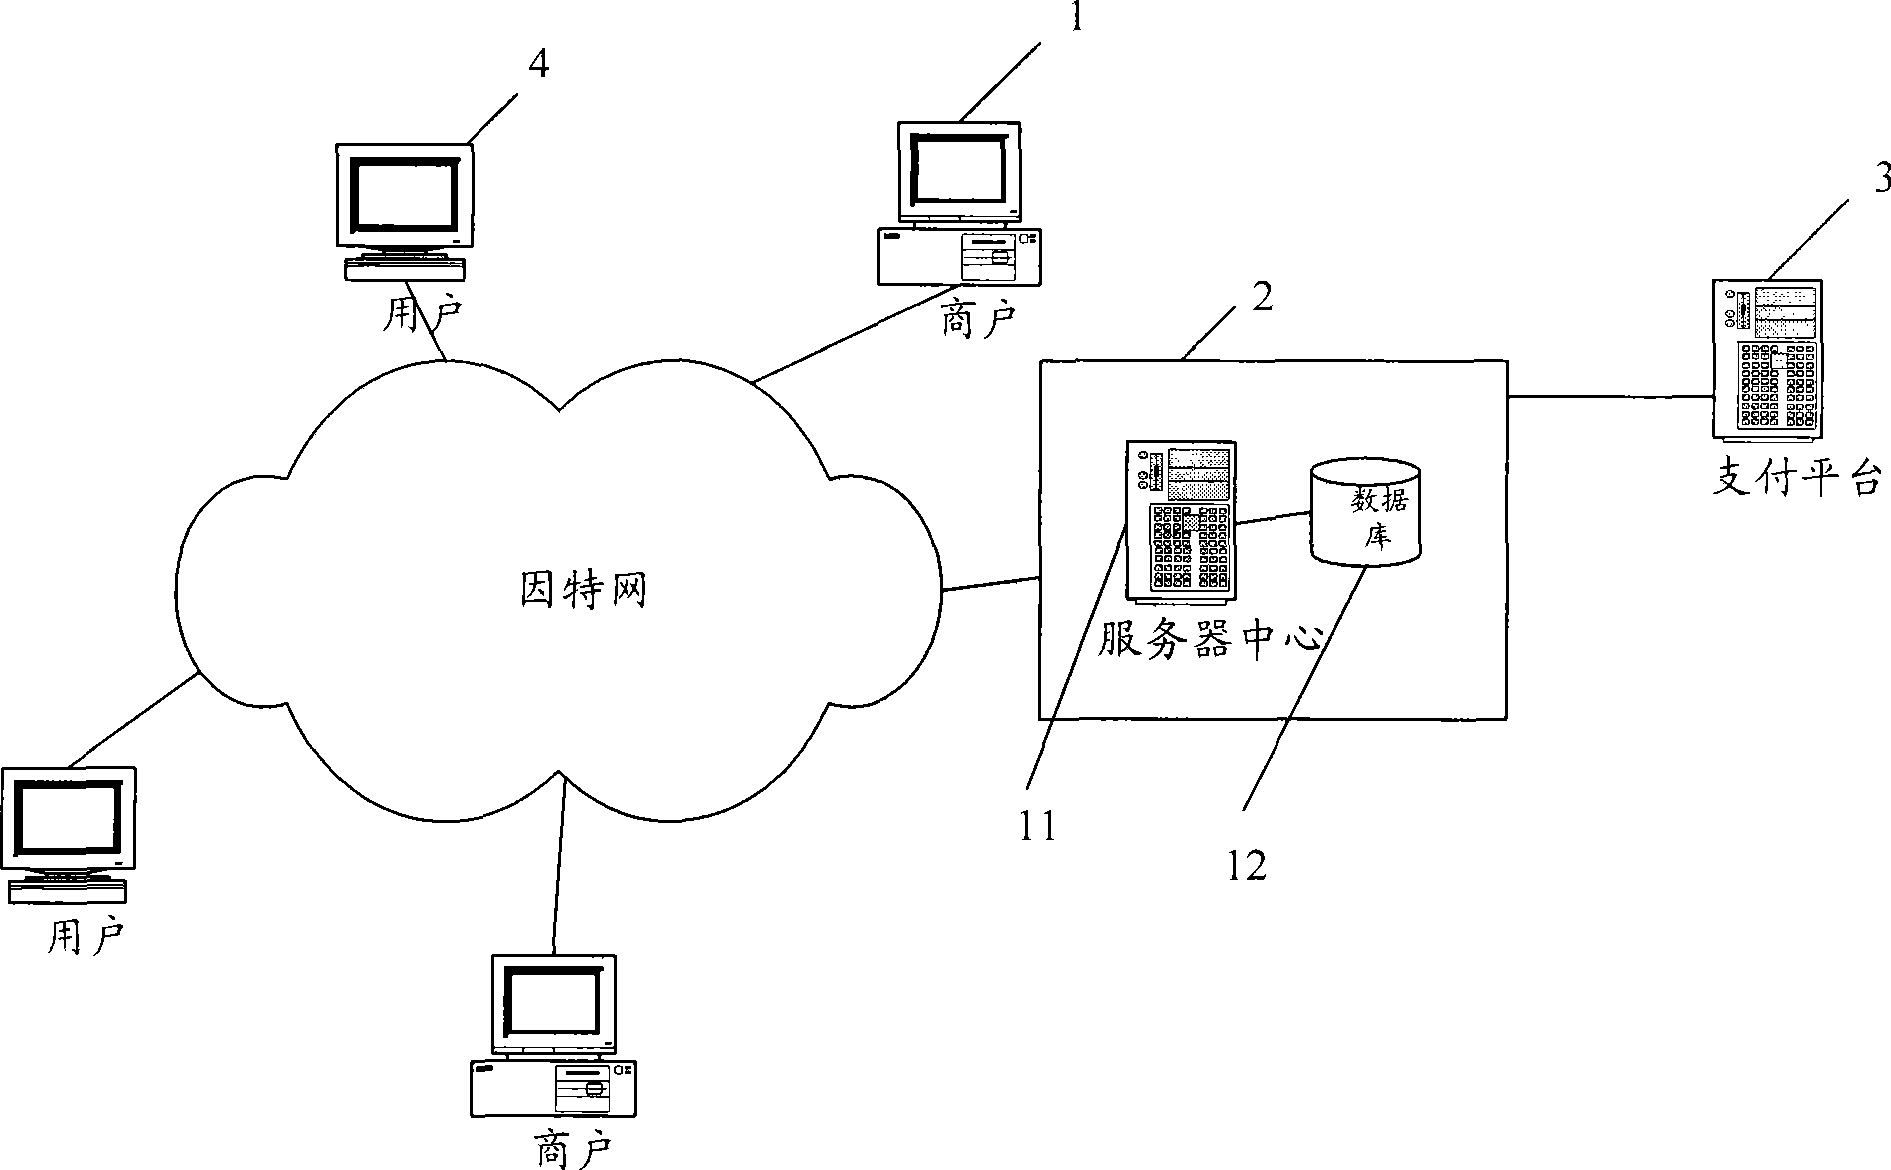 System and method for networking trading using intermediate platform